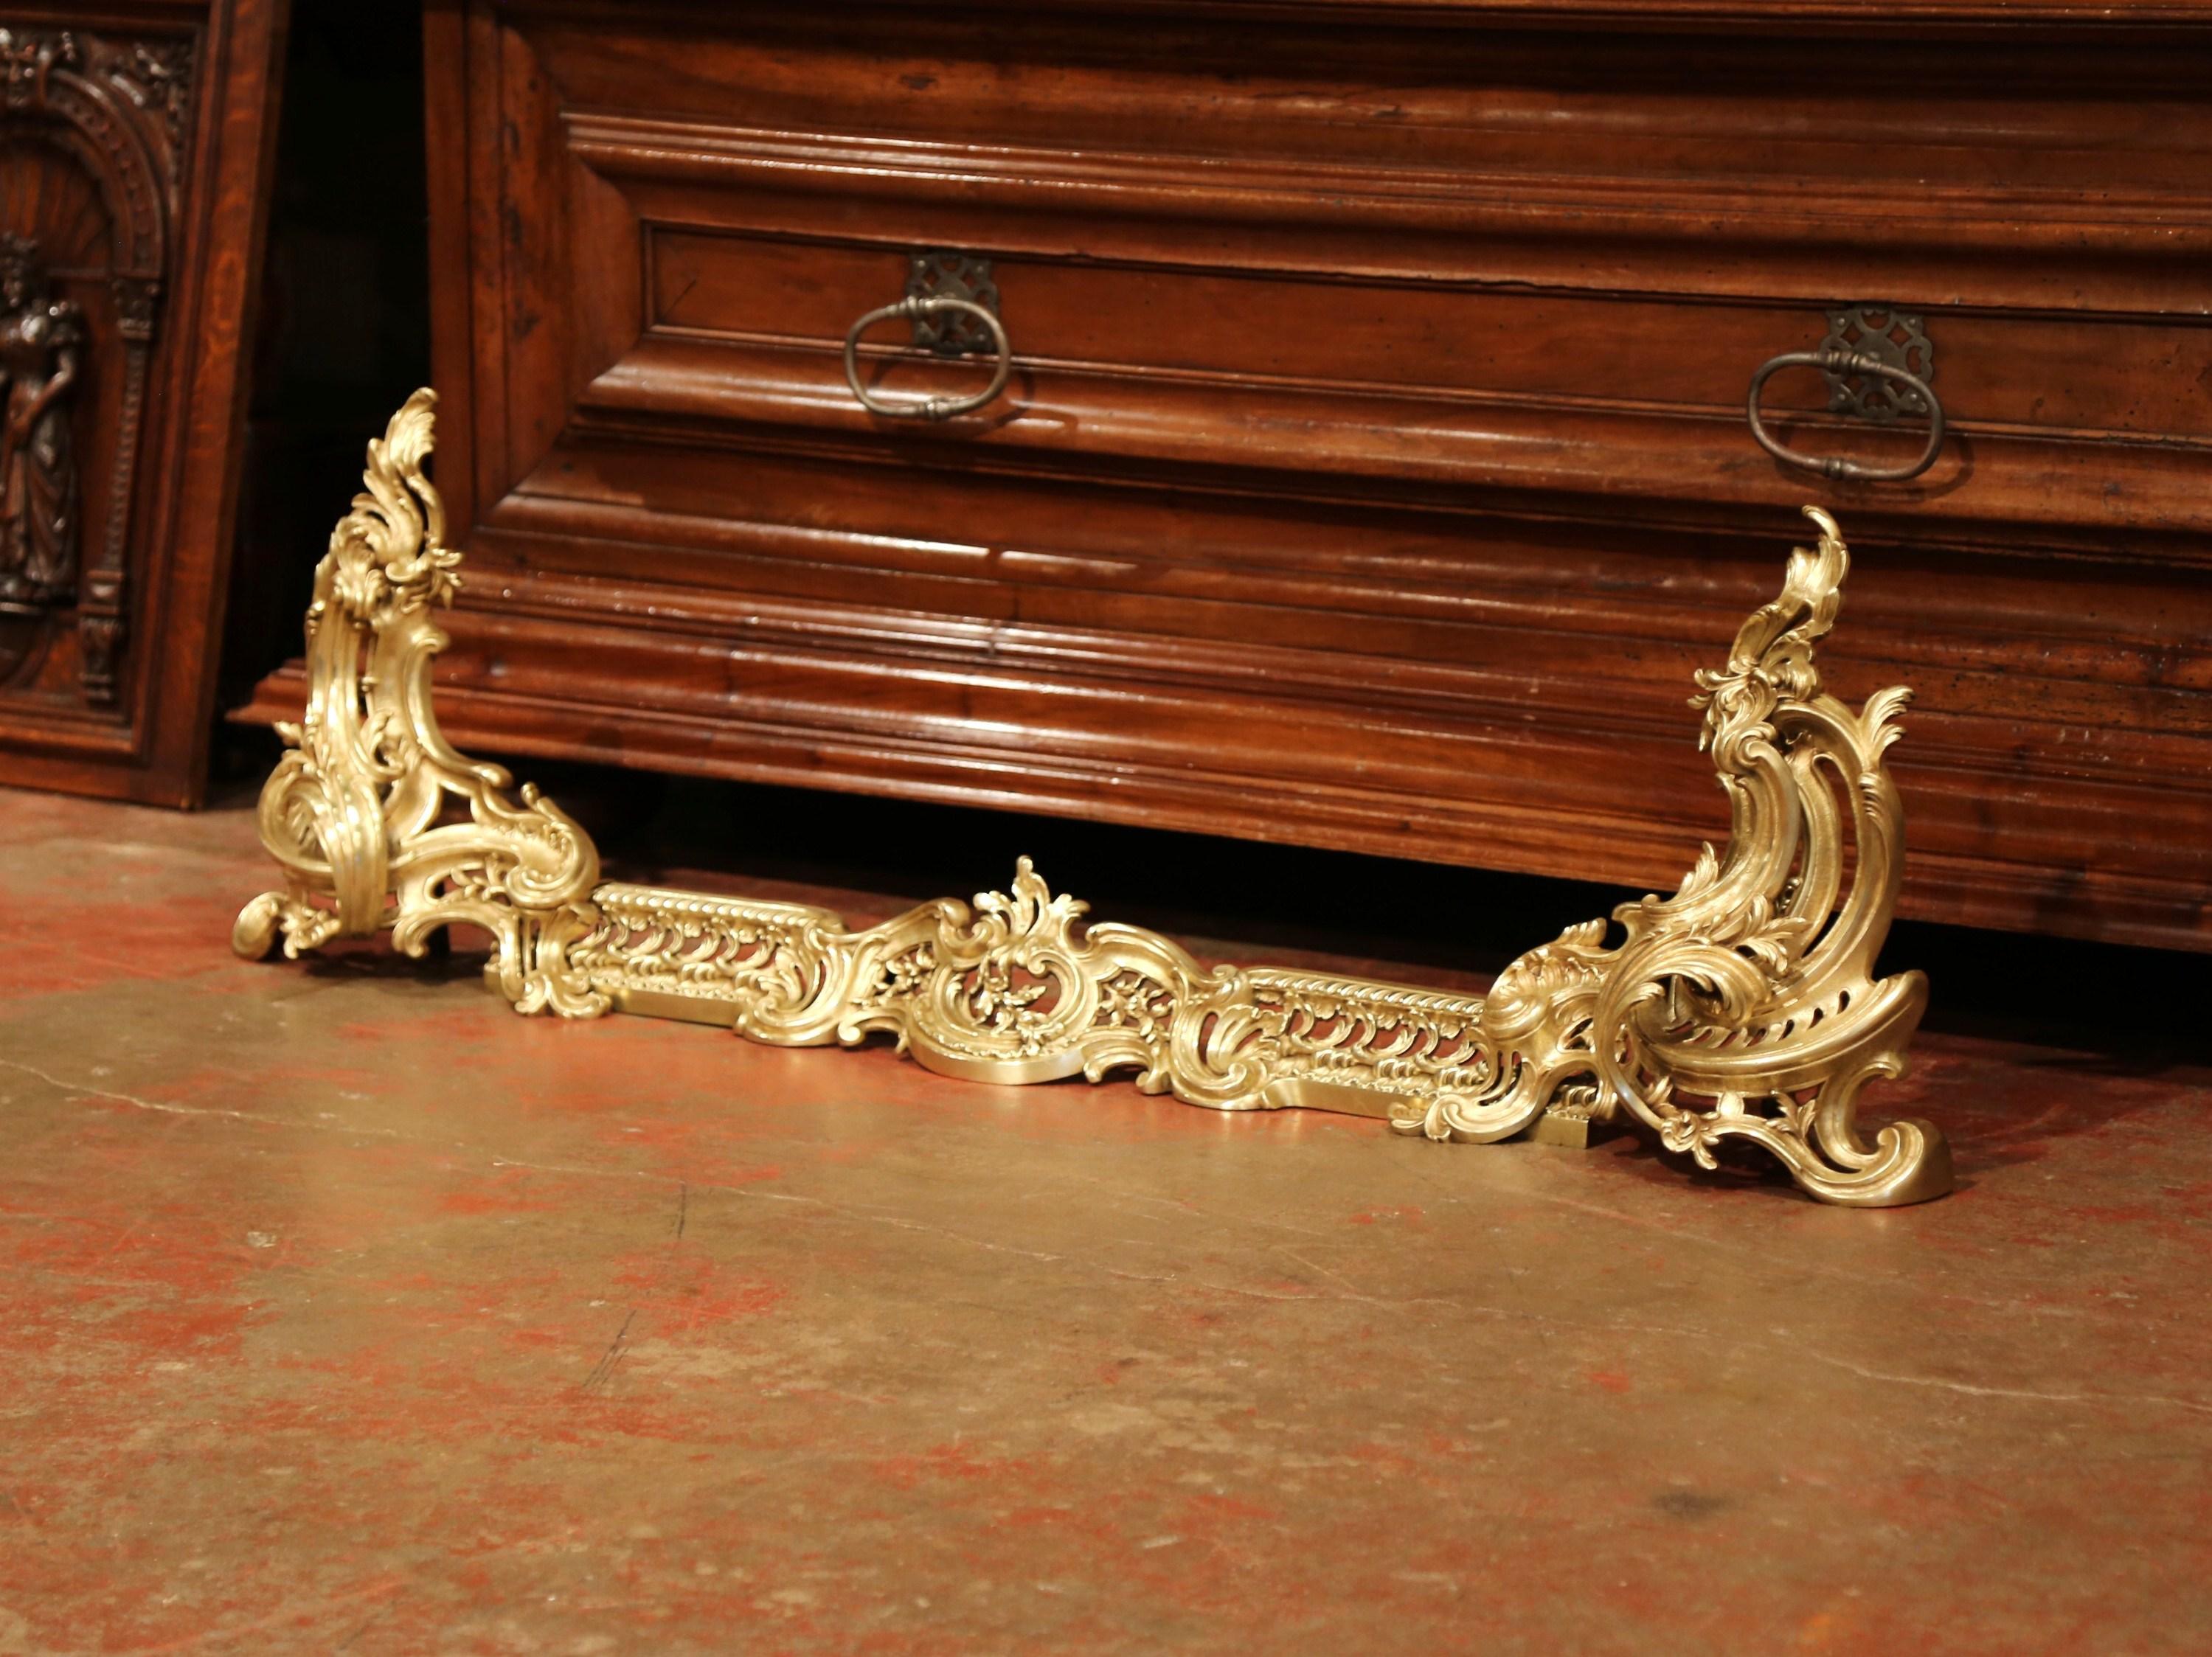 This beautiful, three-piece set would add Classic French elegance to your fireplace. Crafted in France circa 1960, the elegant rococo set includes two gilt bronze chenets and a large, matching center fender. Each piece is decorated with swirling and